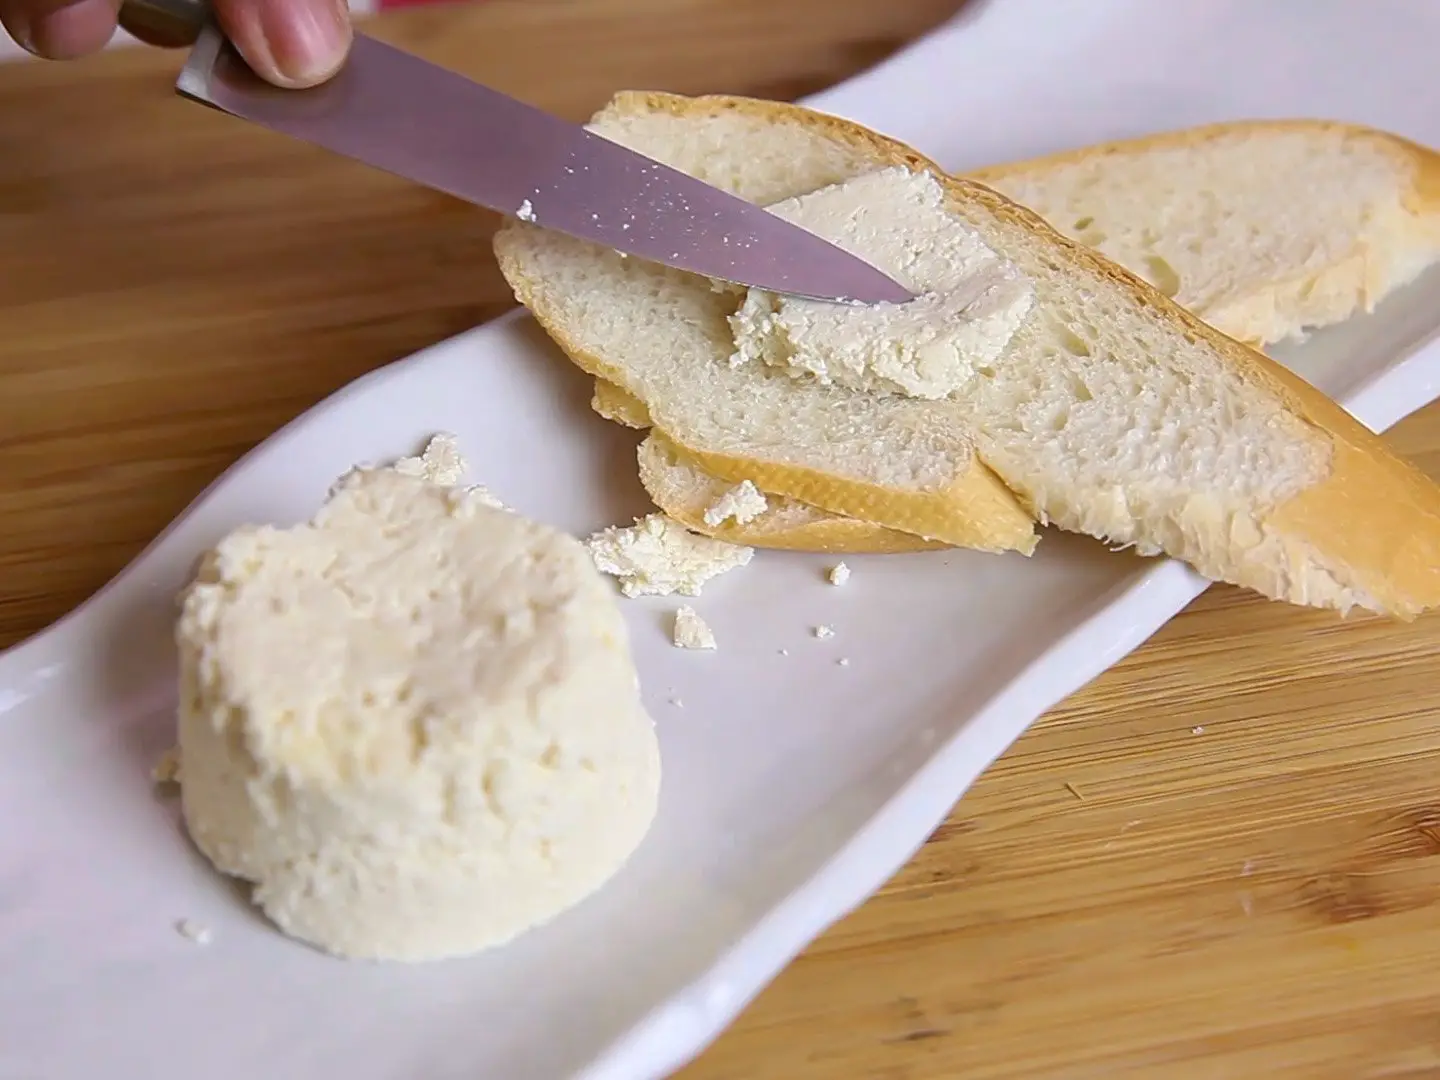 How to Make Cheese at Home: 11 Steps (with Pictures)